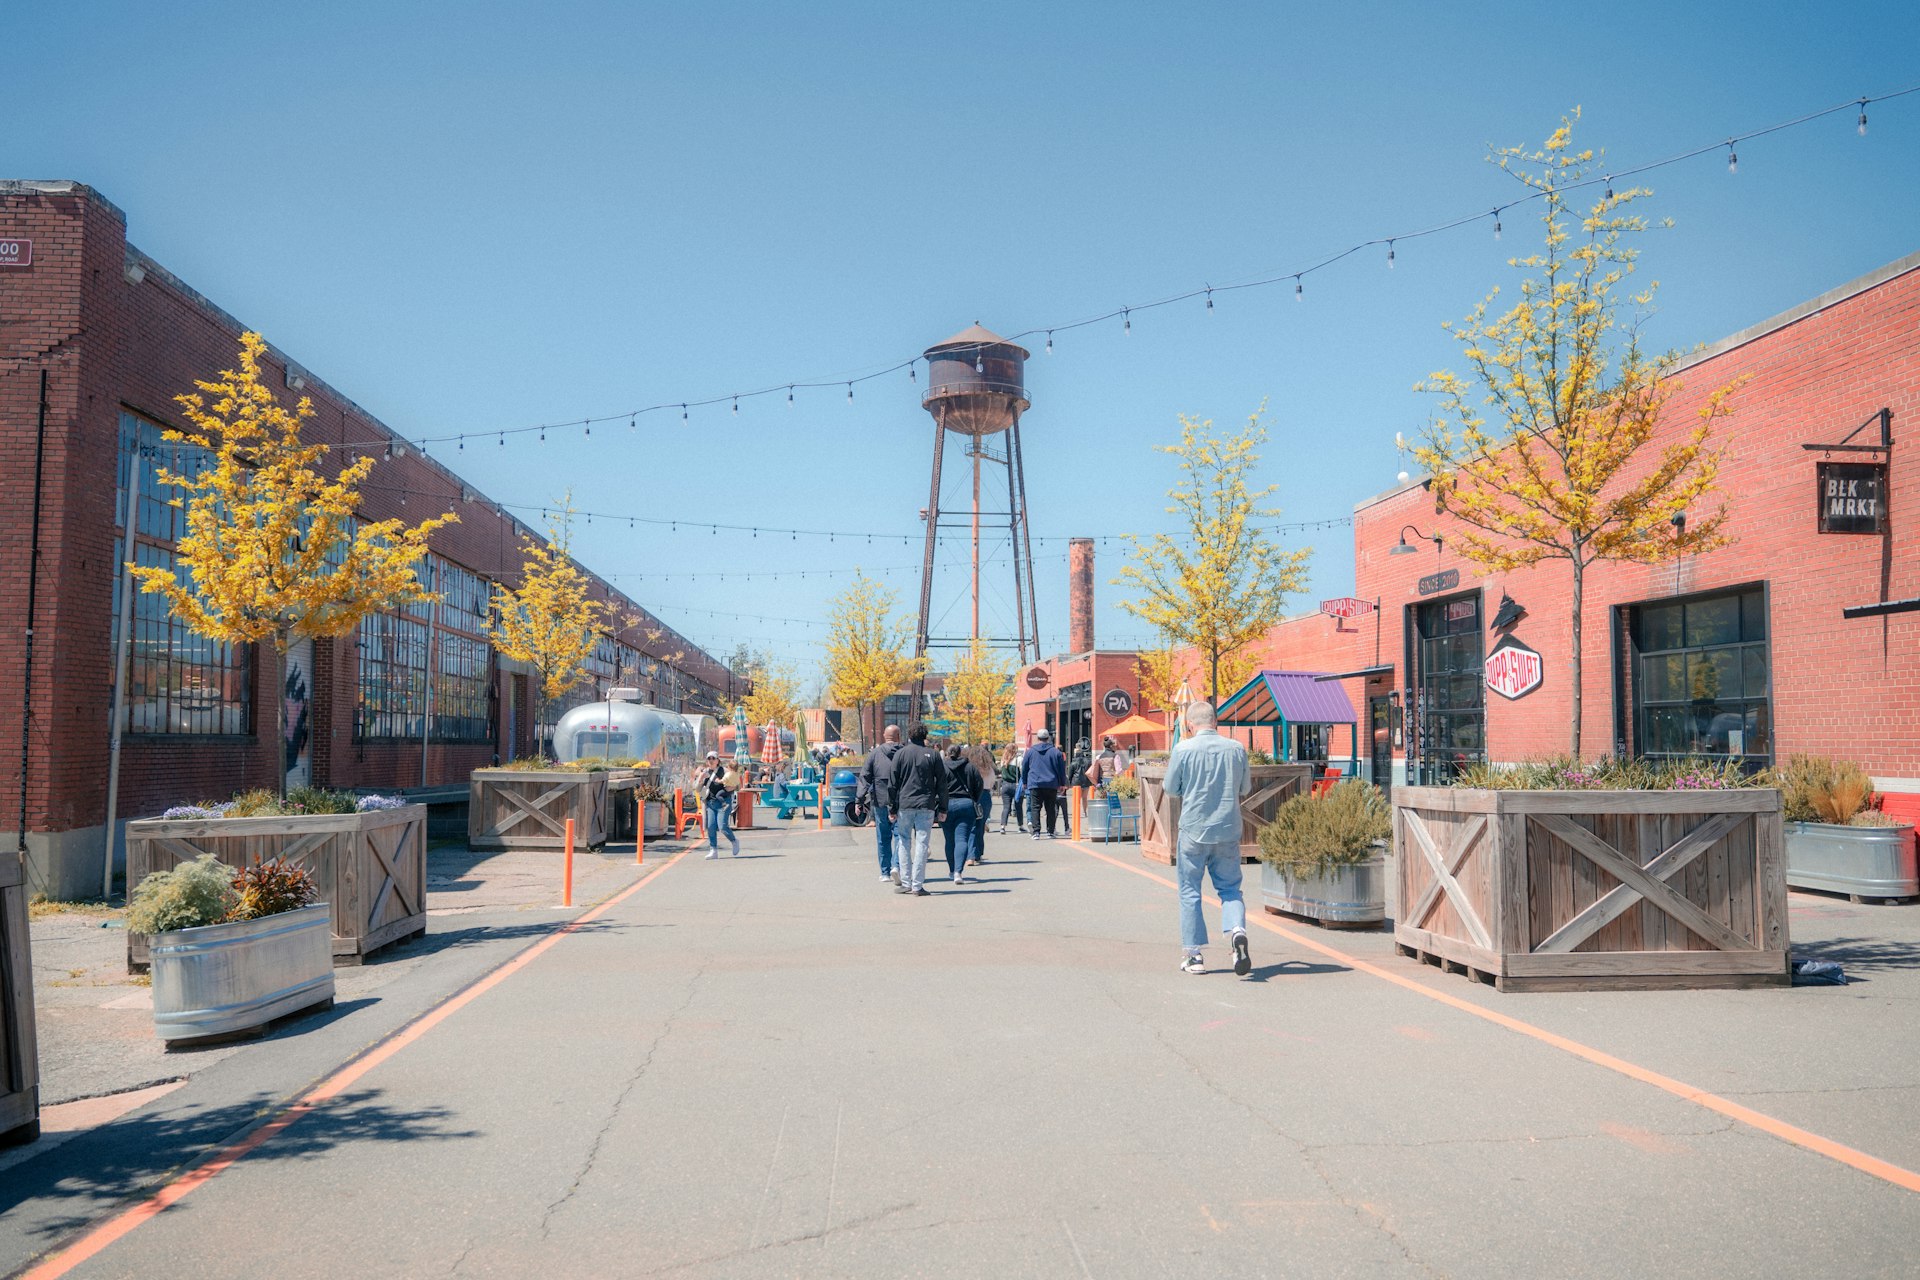 People walk through an outdoor retail space with a large water tower at one end